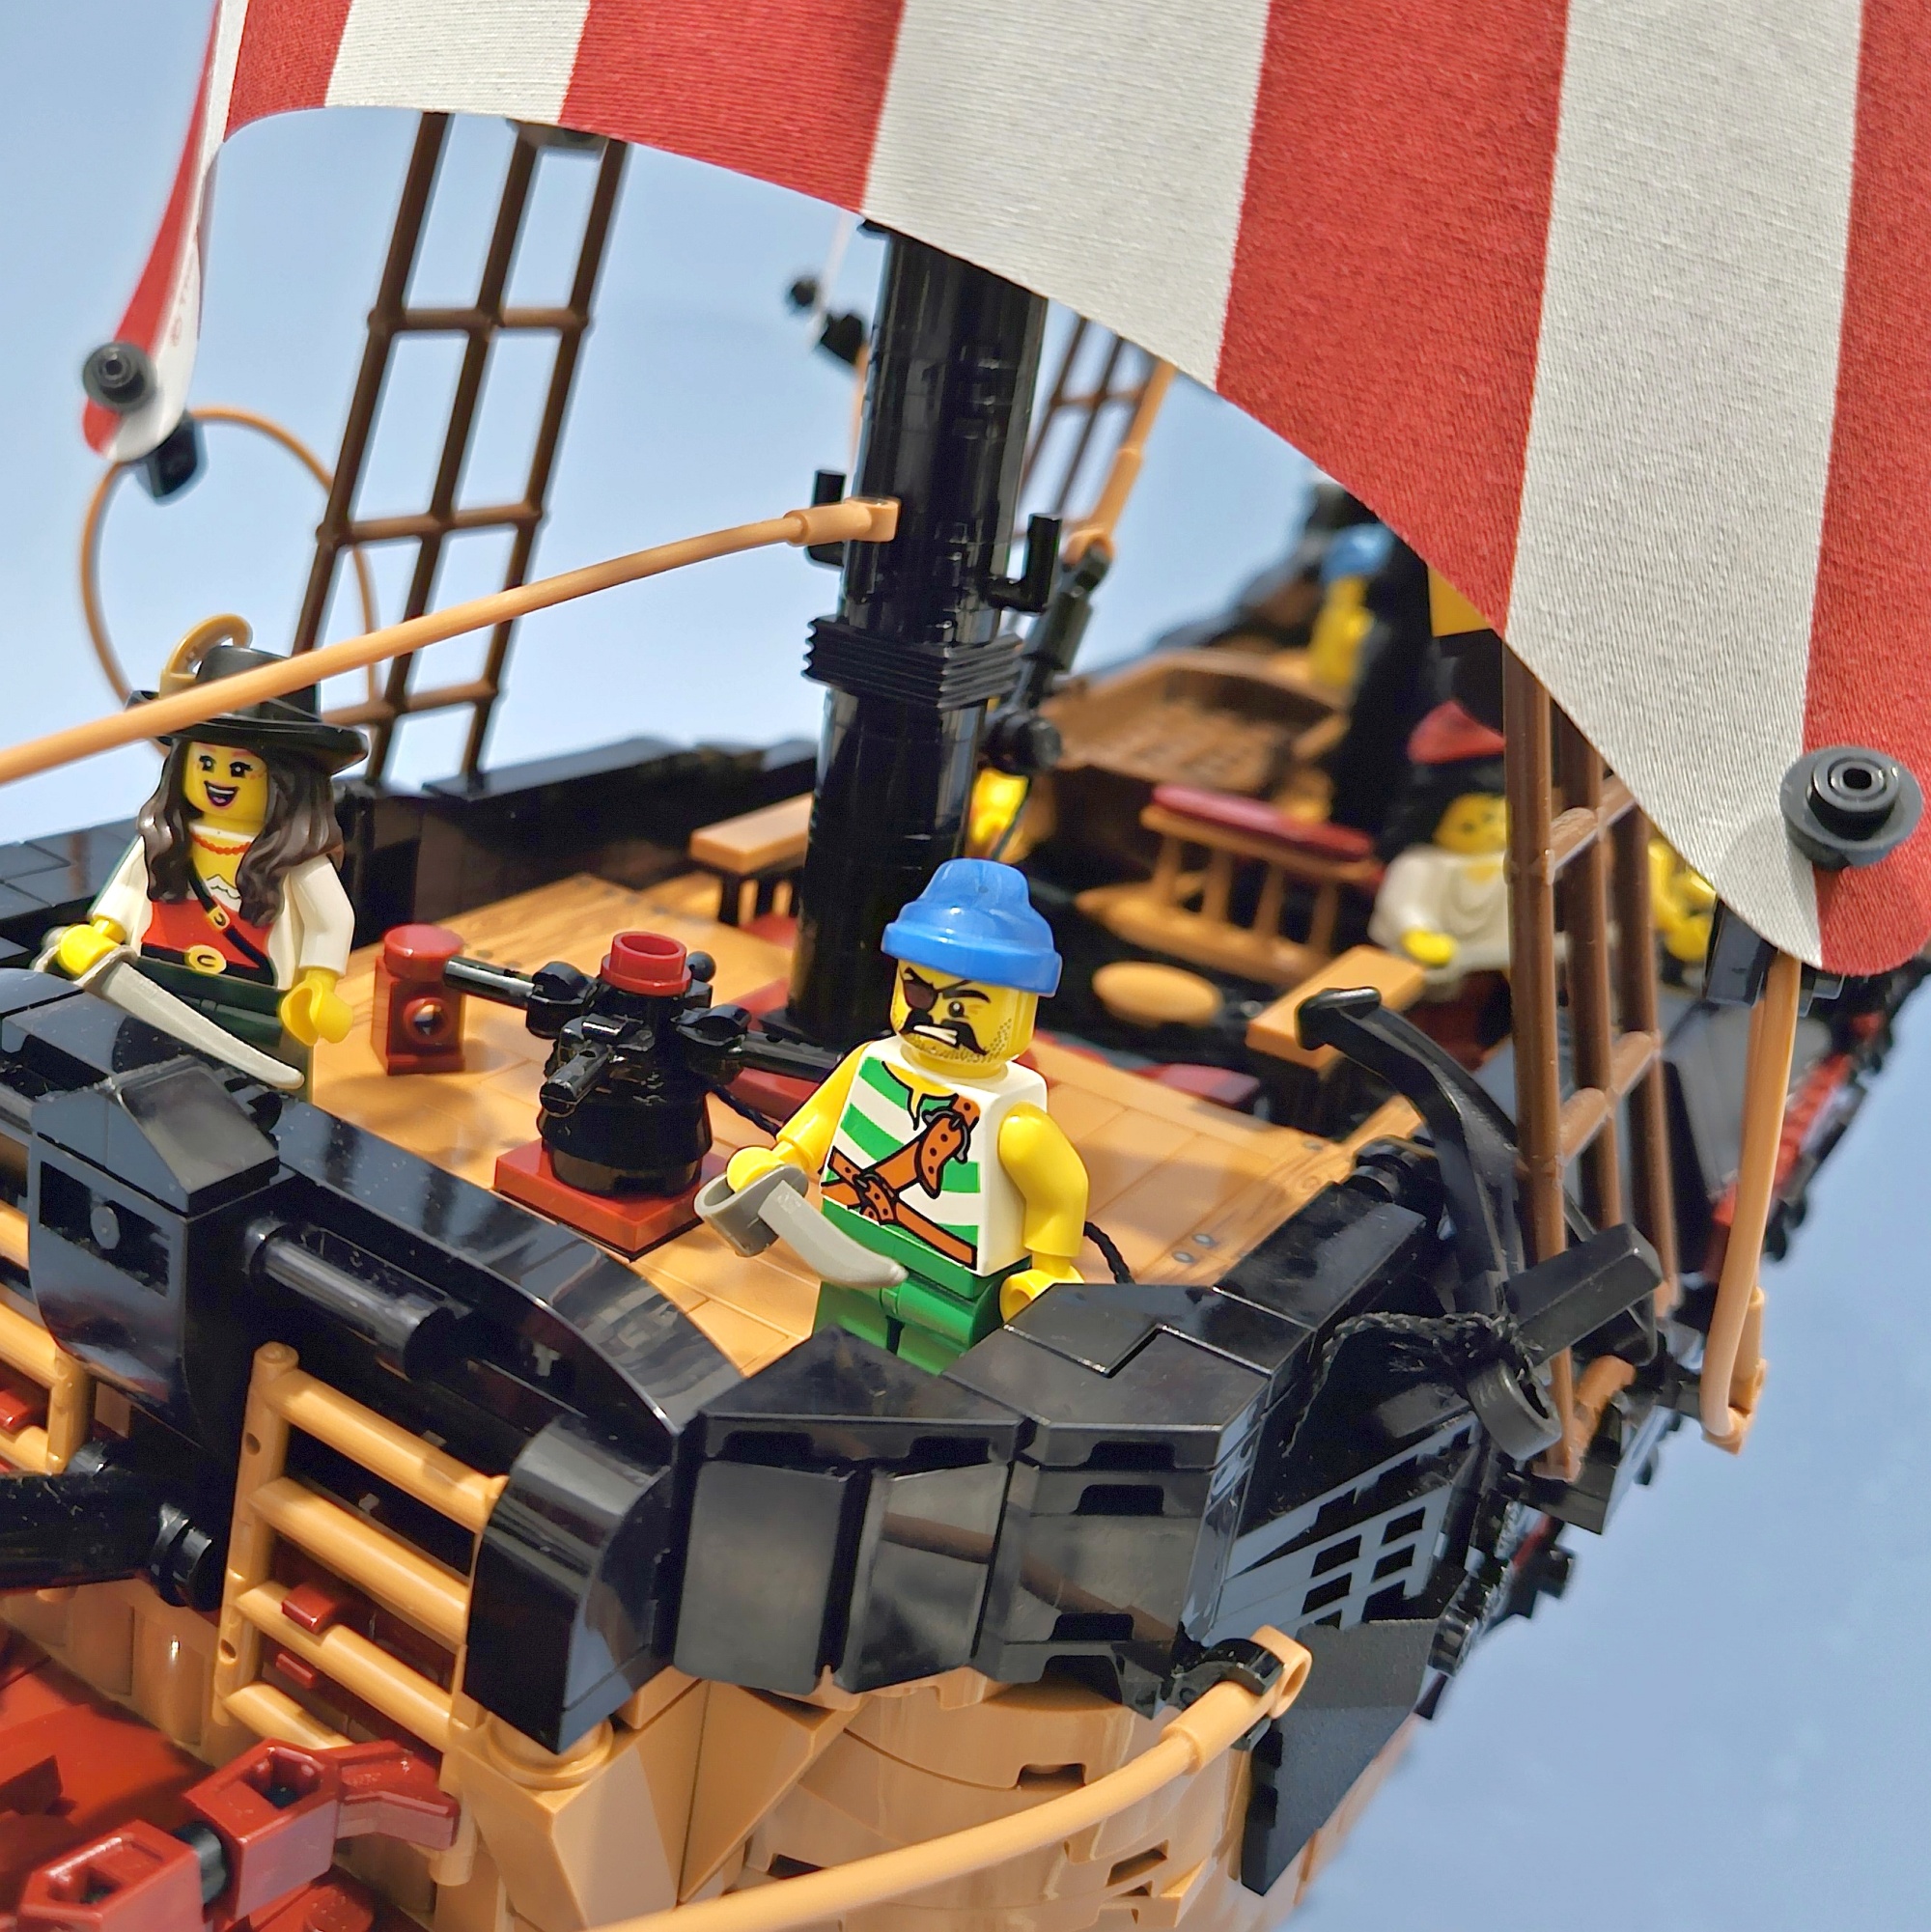 Get excited for the Pirate LEGO VIP Value Add-On pack! – The home